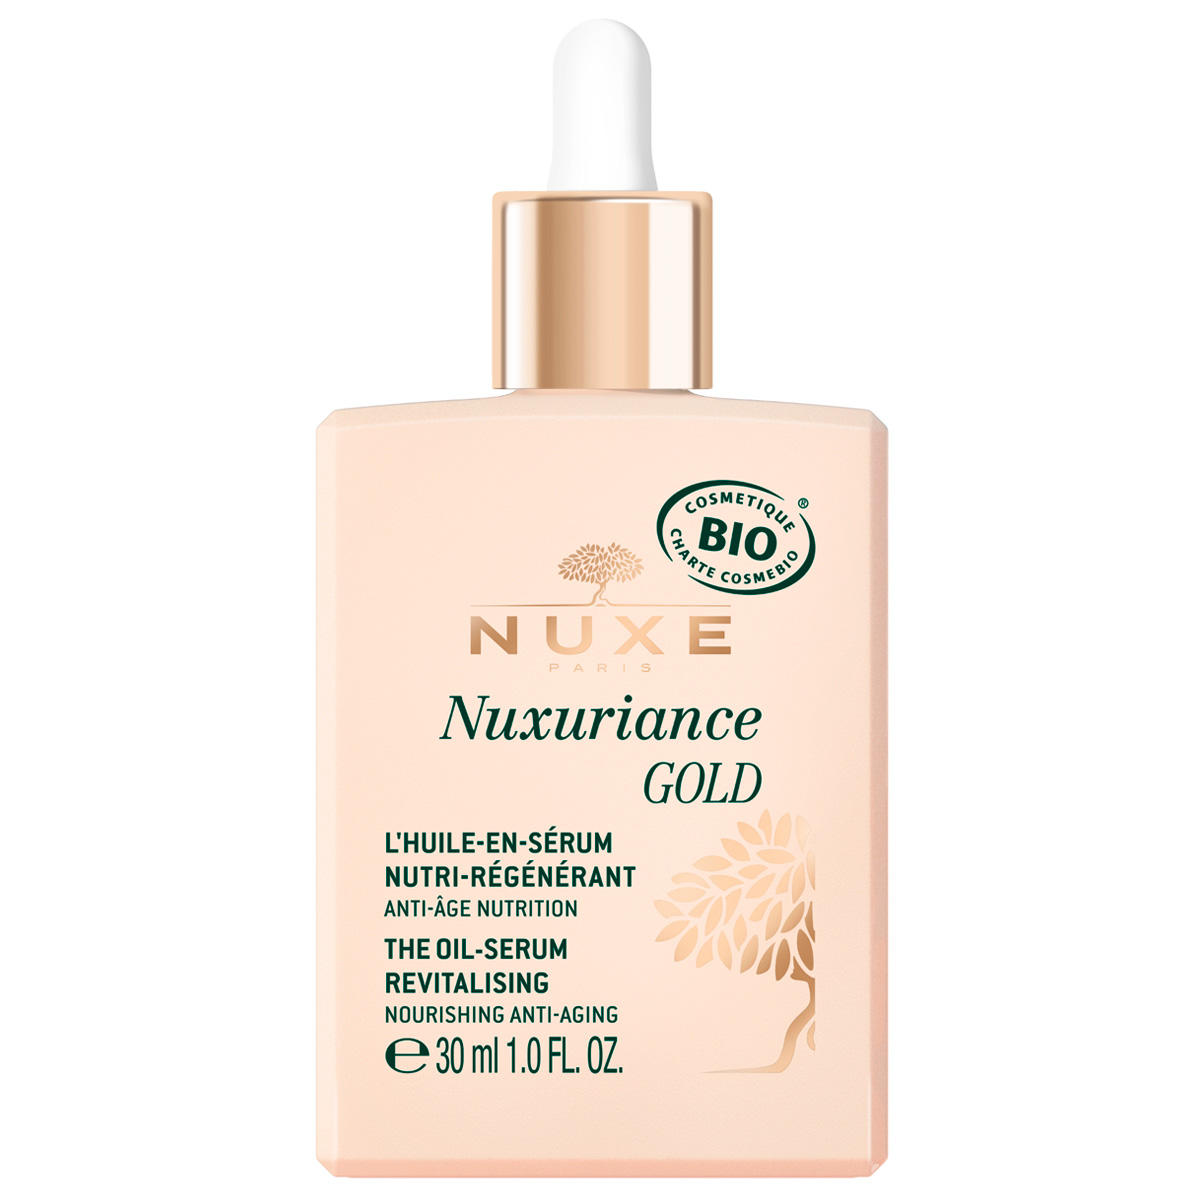 NUXE Nuxuriance Gold The Oil-Serum Revitalizing 30 ml - 1